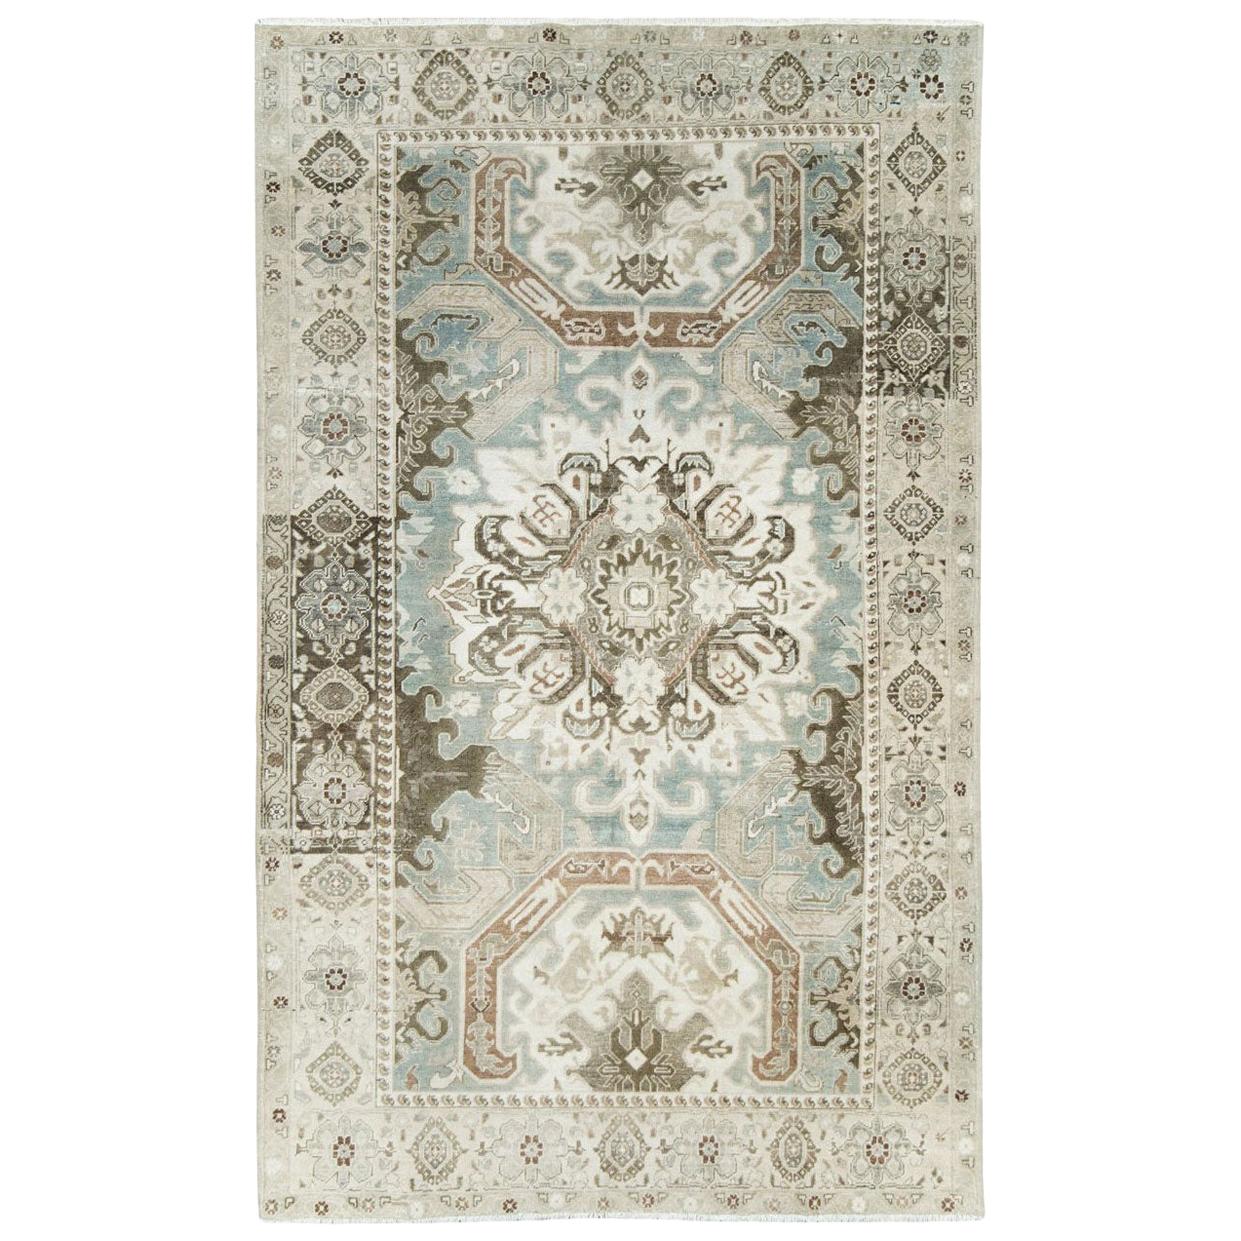 Mid-20th Century Handmade Persian Tabriz Accent Rug in Grey and Cream